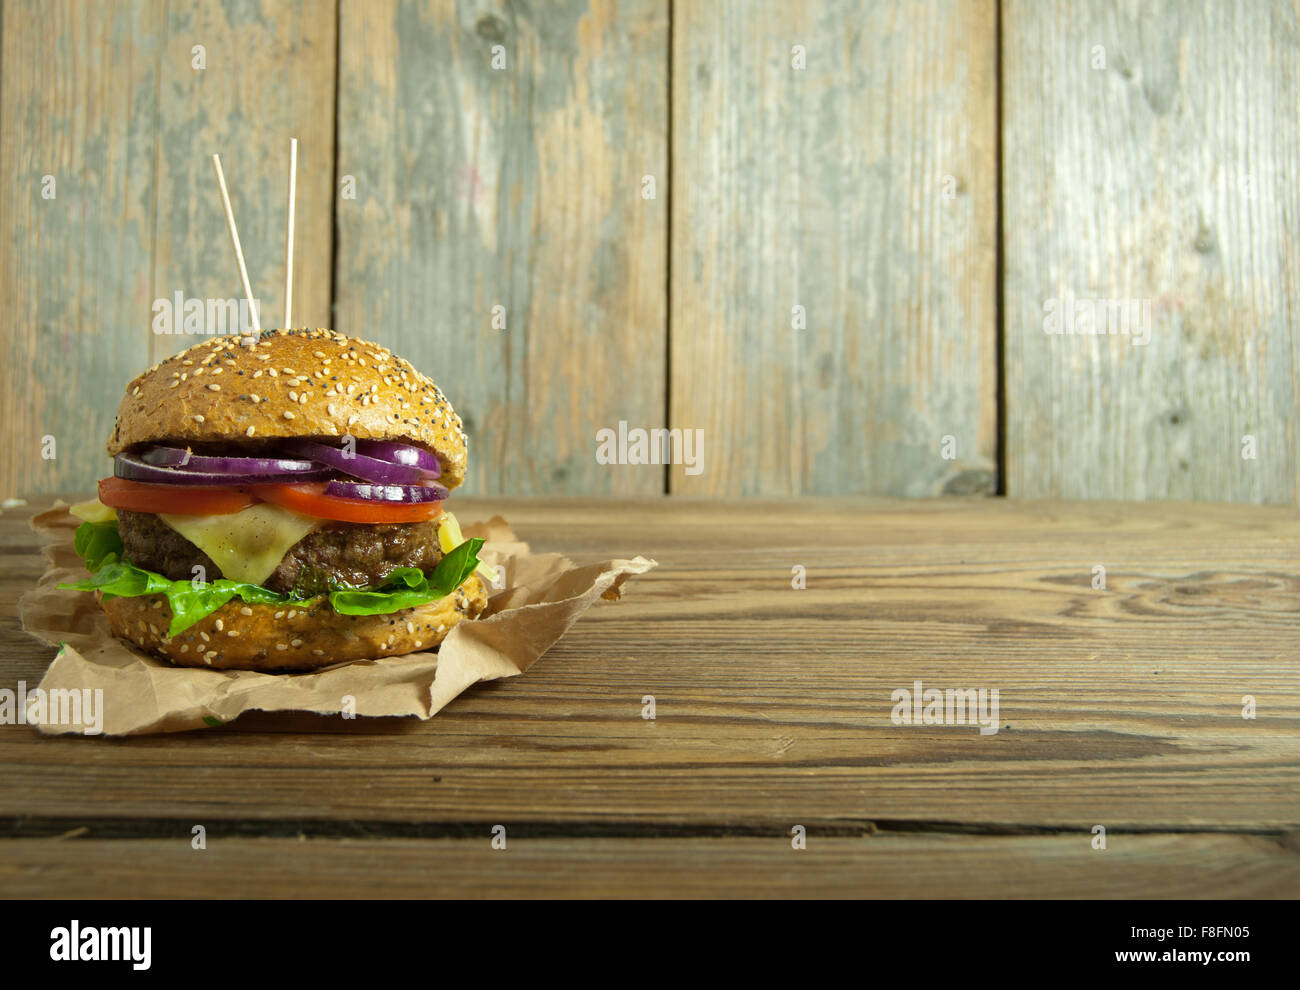 Gourmet burger with melted cheese, tomato and onion filling on top of a wooden chopping board with space for text Stock Photo